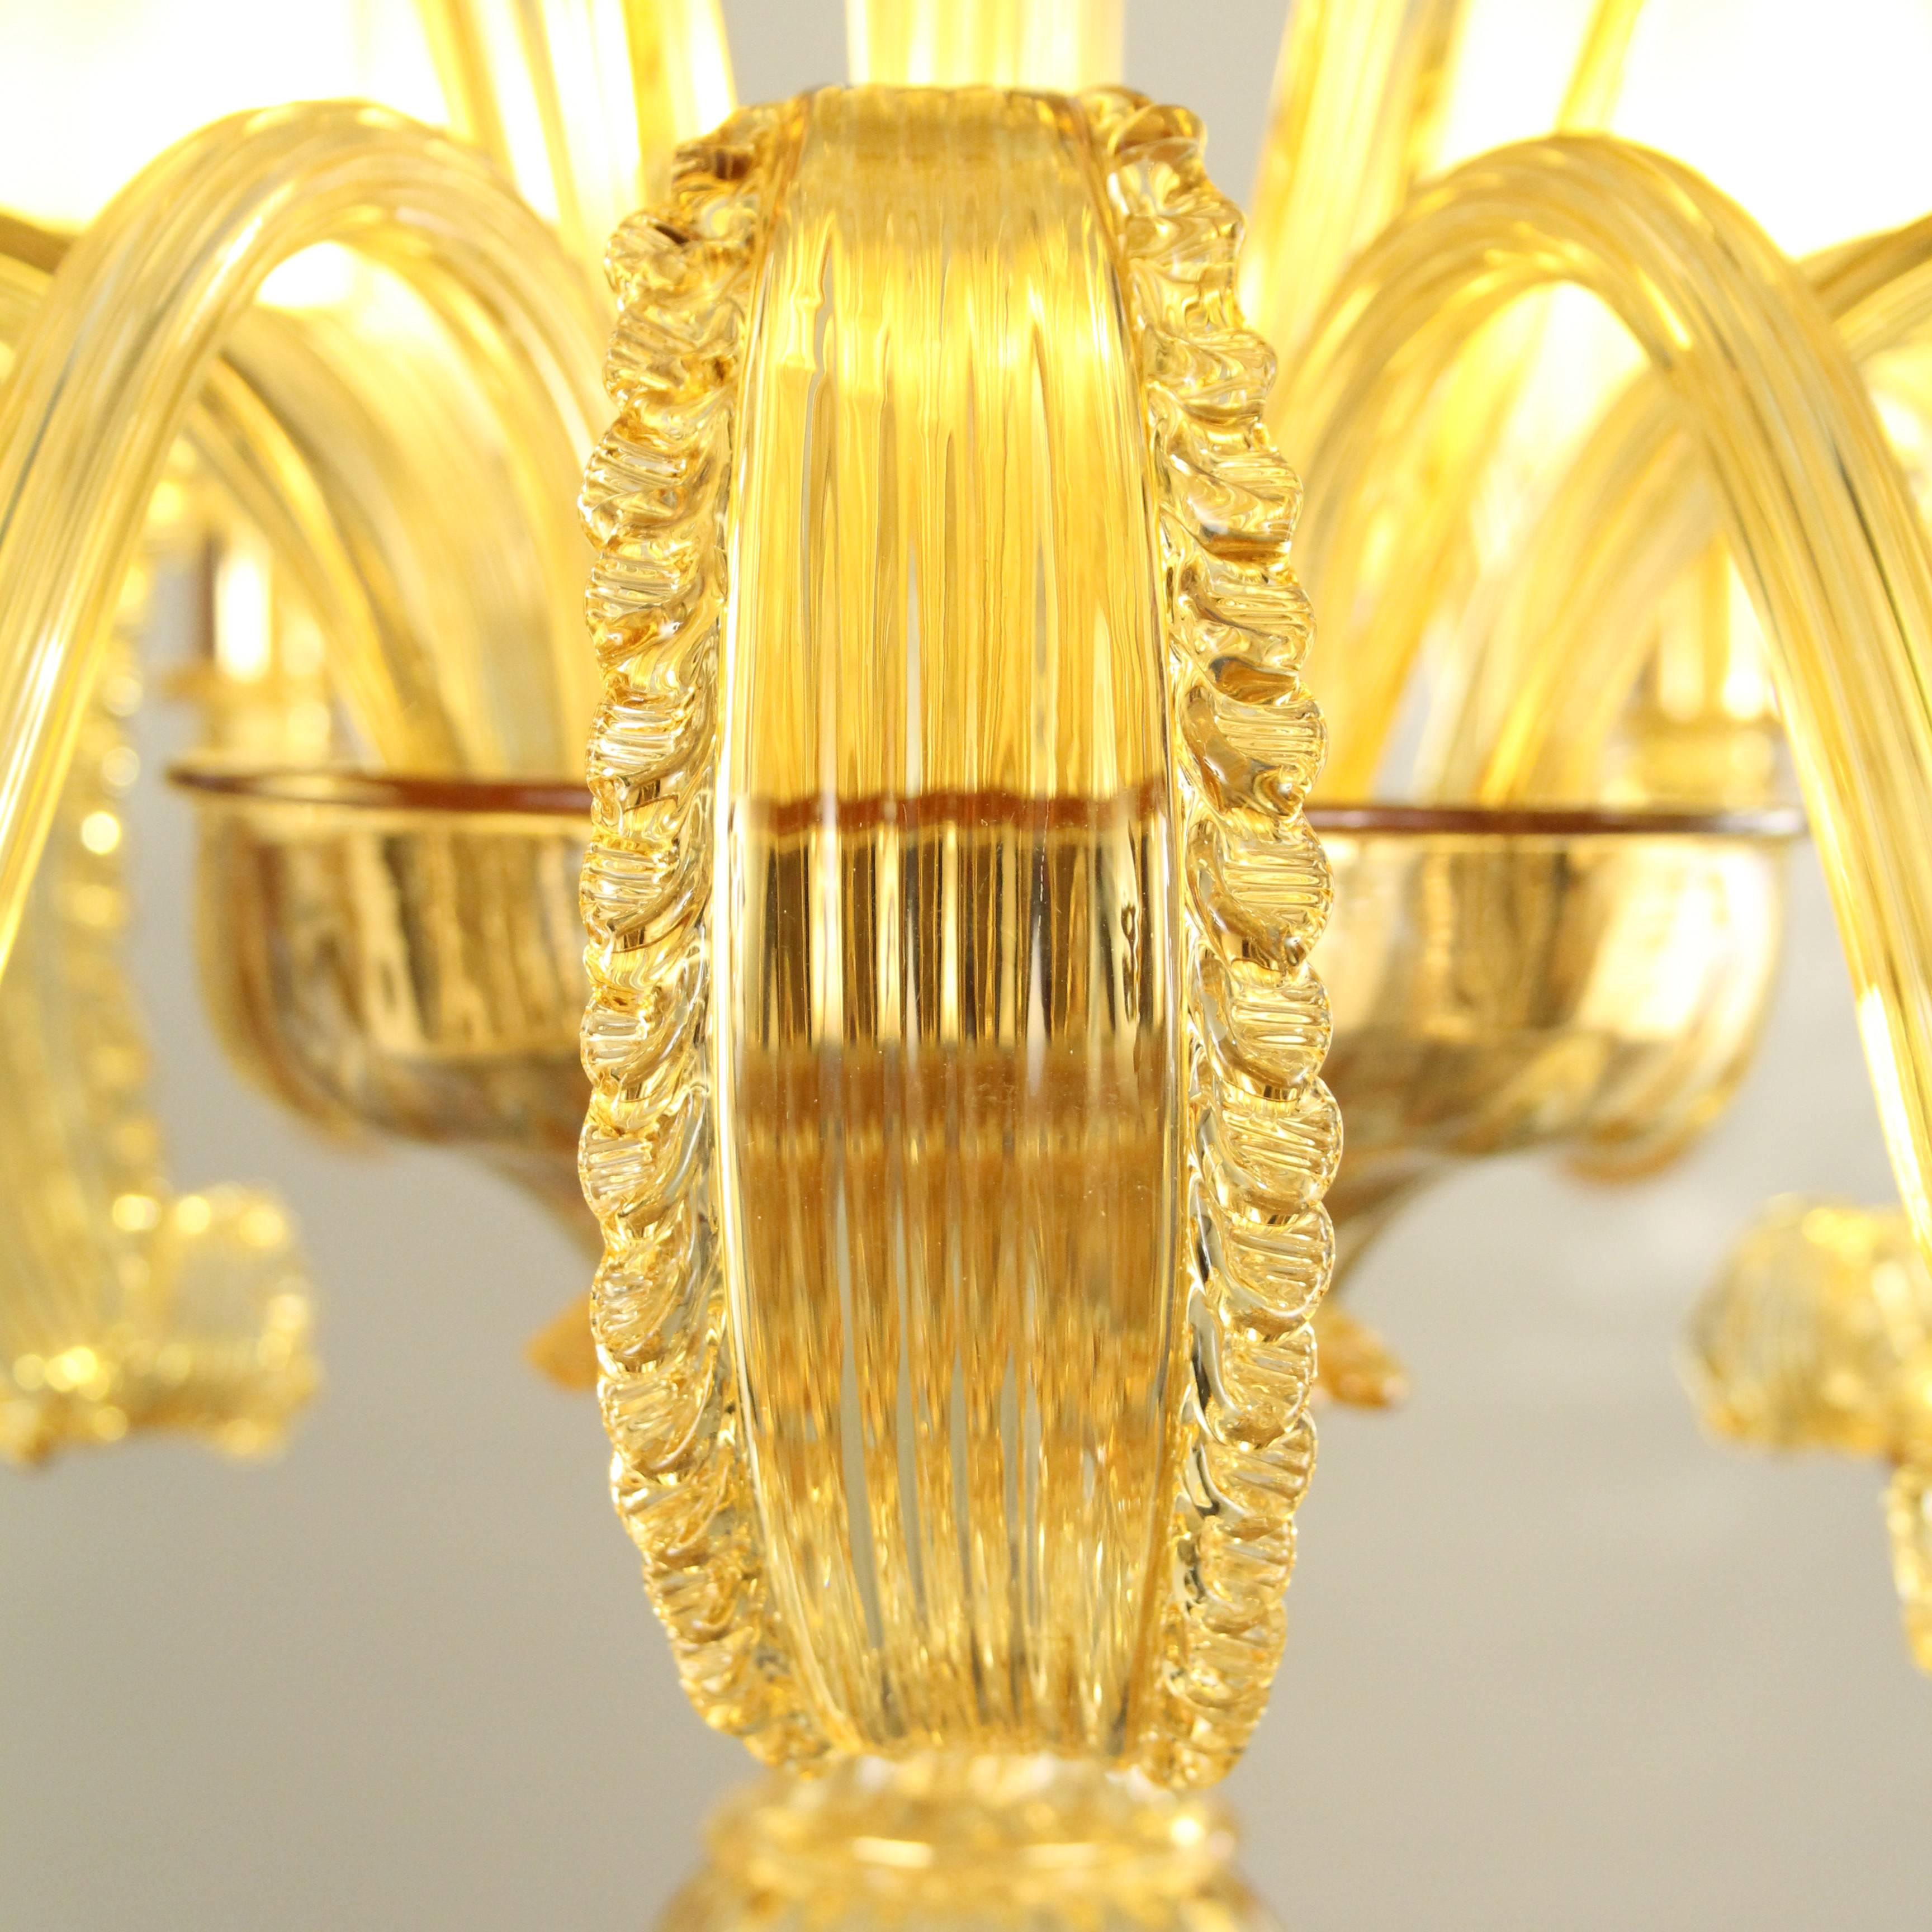 Deco style six-arms Venetian chandelier, handmade with Murano blown glass honey amber color. Golden frame finish.
Organza silk lampshades, handmade in Florence.
Available without lampshades with price reduction.
Spare parts and ceiling canopy and